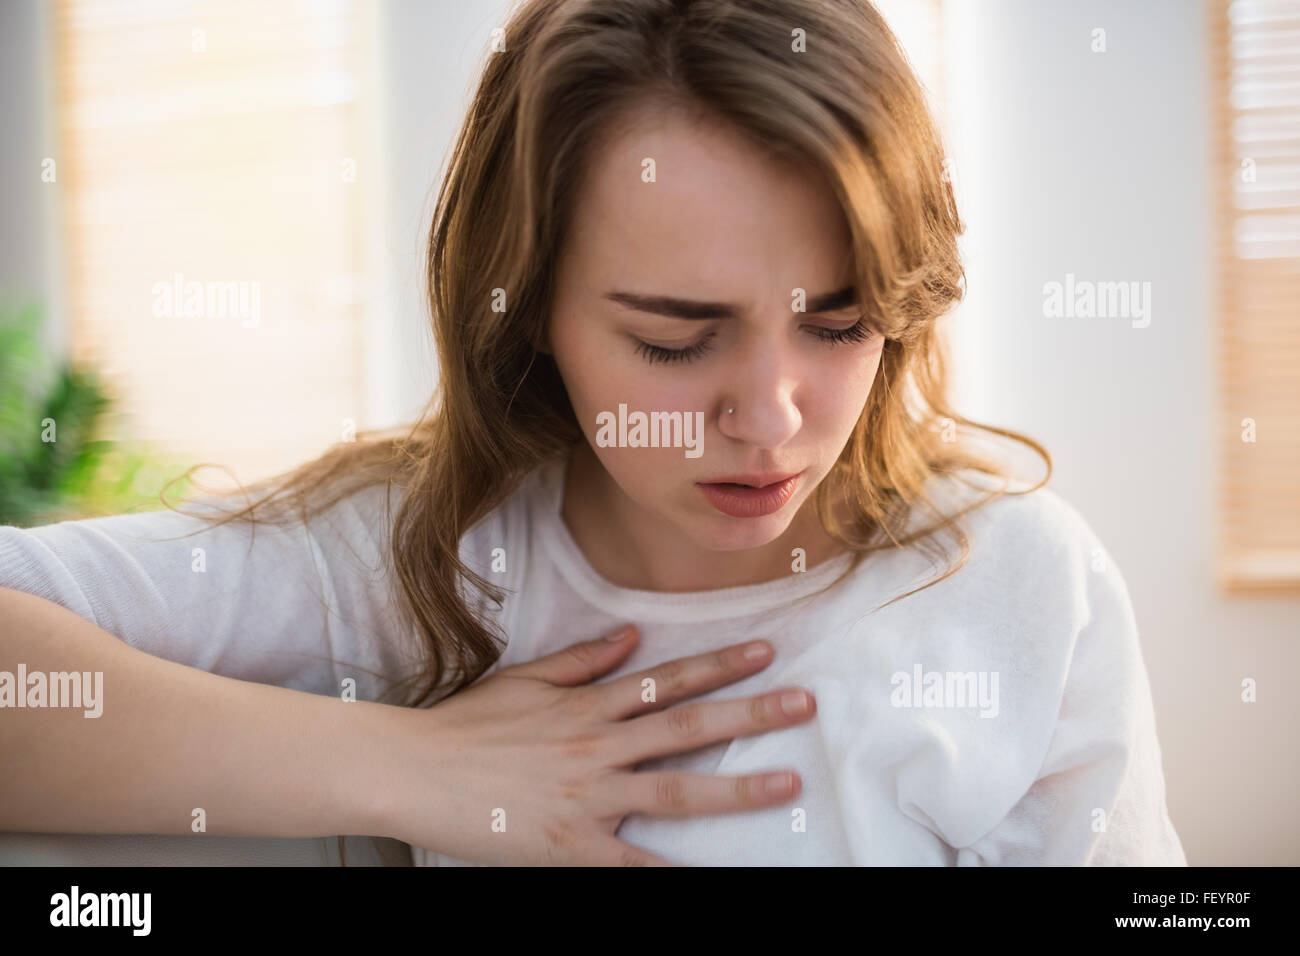 Pretty woman suffering from chest pain Stock Photo